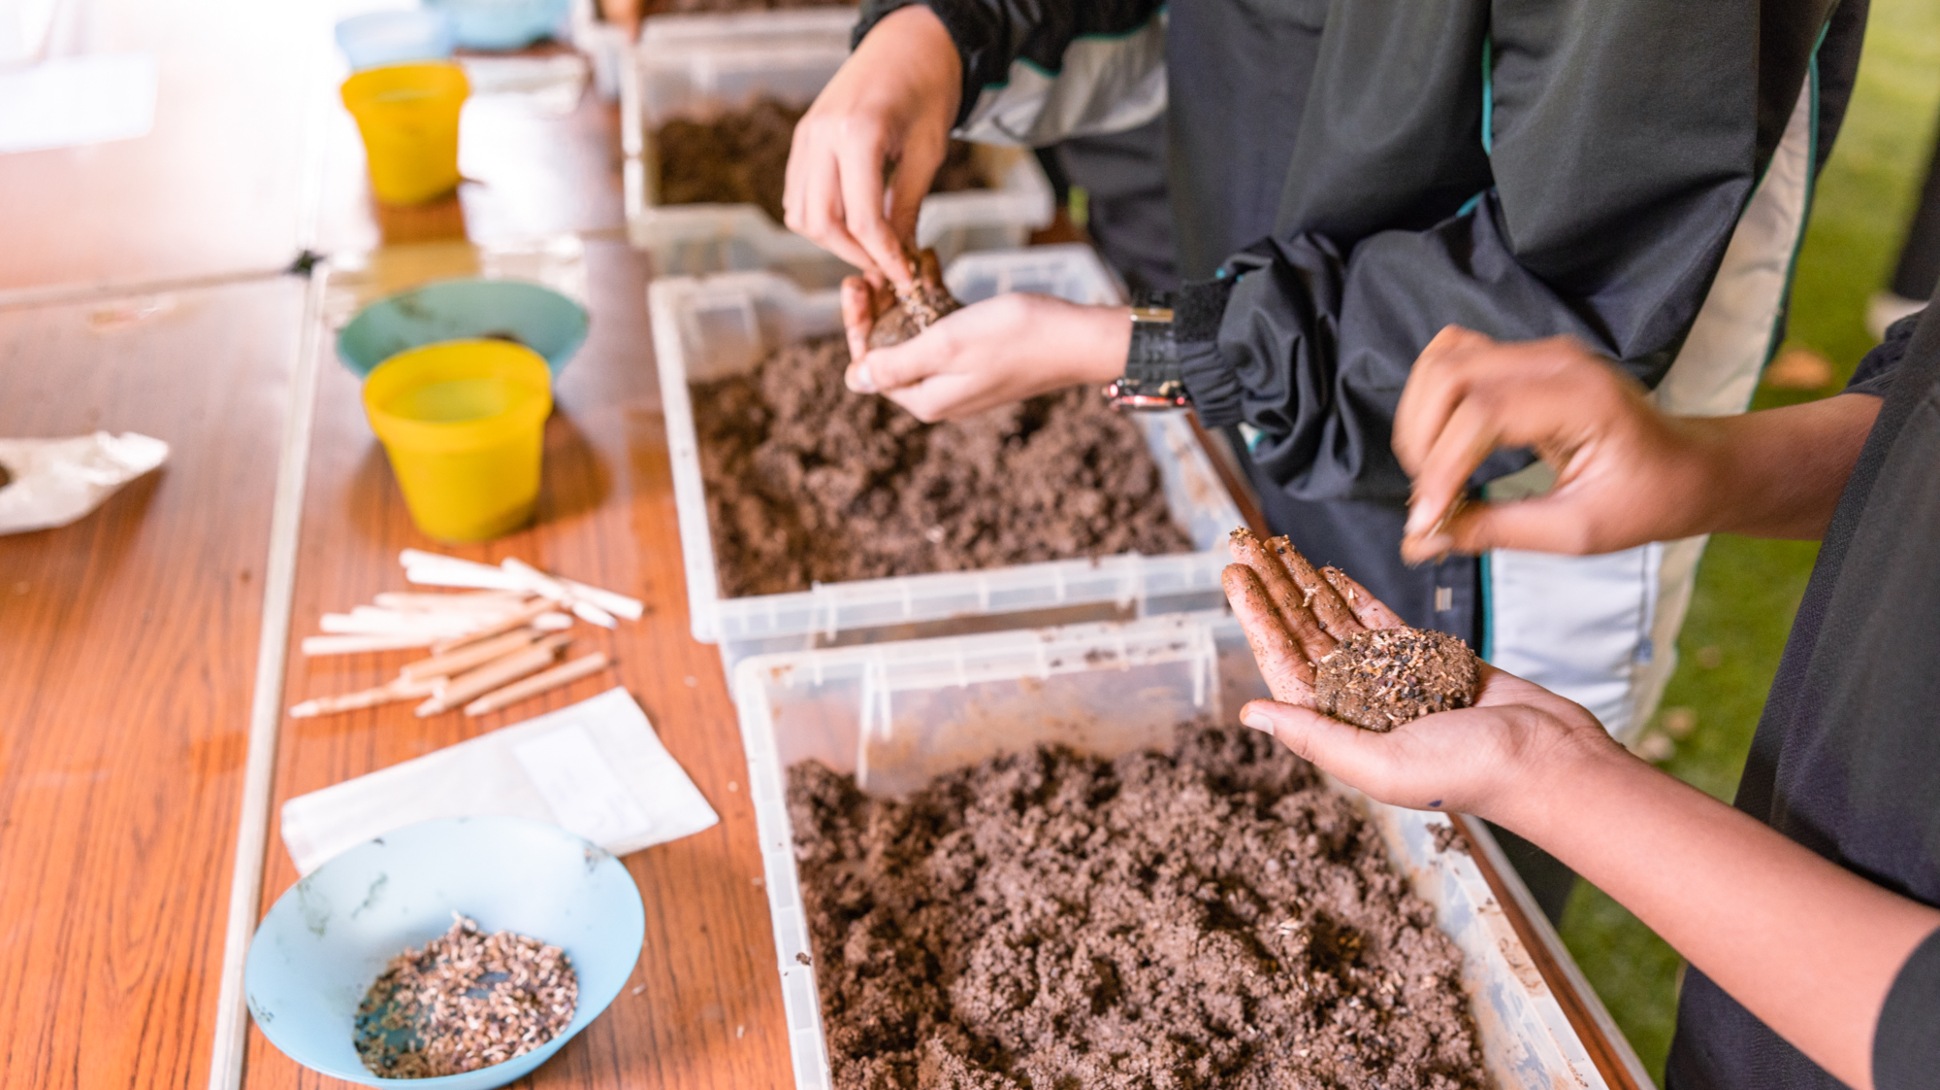 children create seed bombs using crates of soil